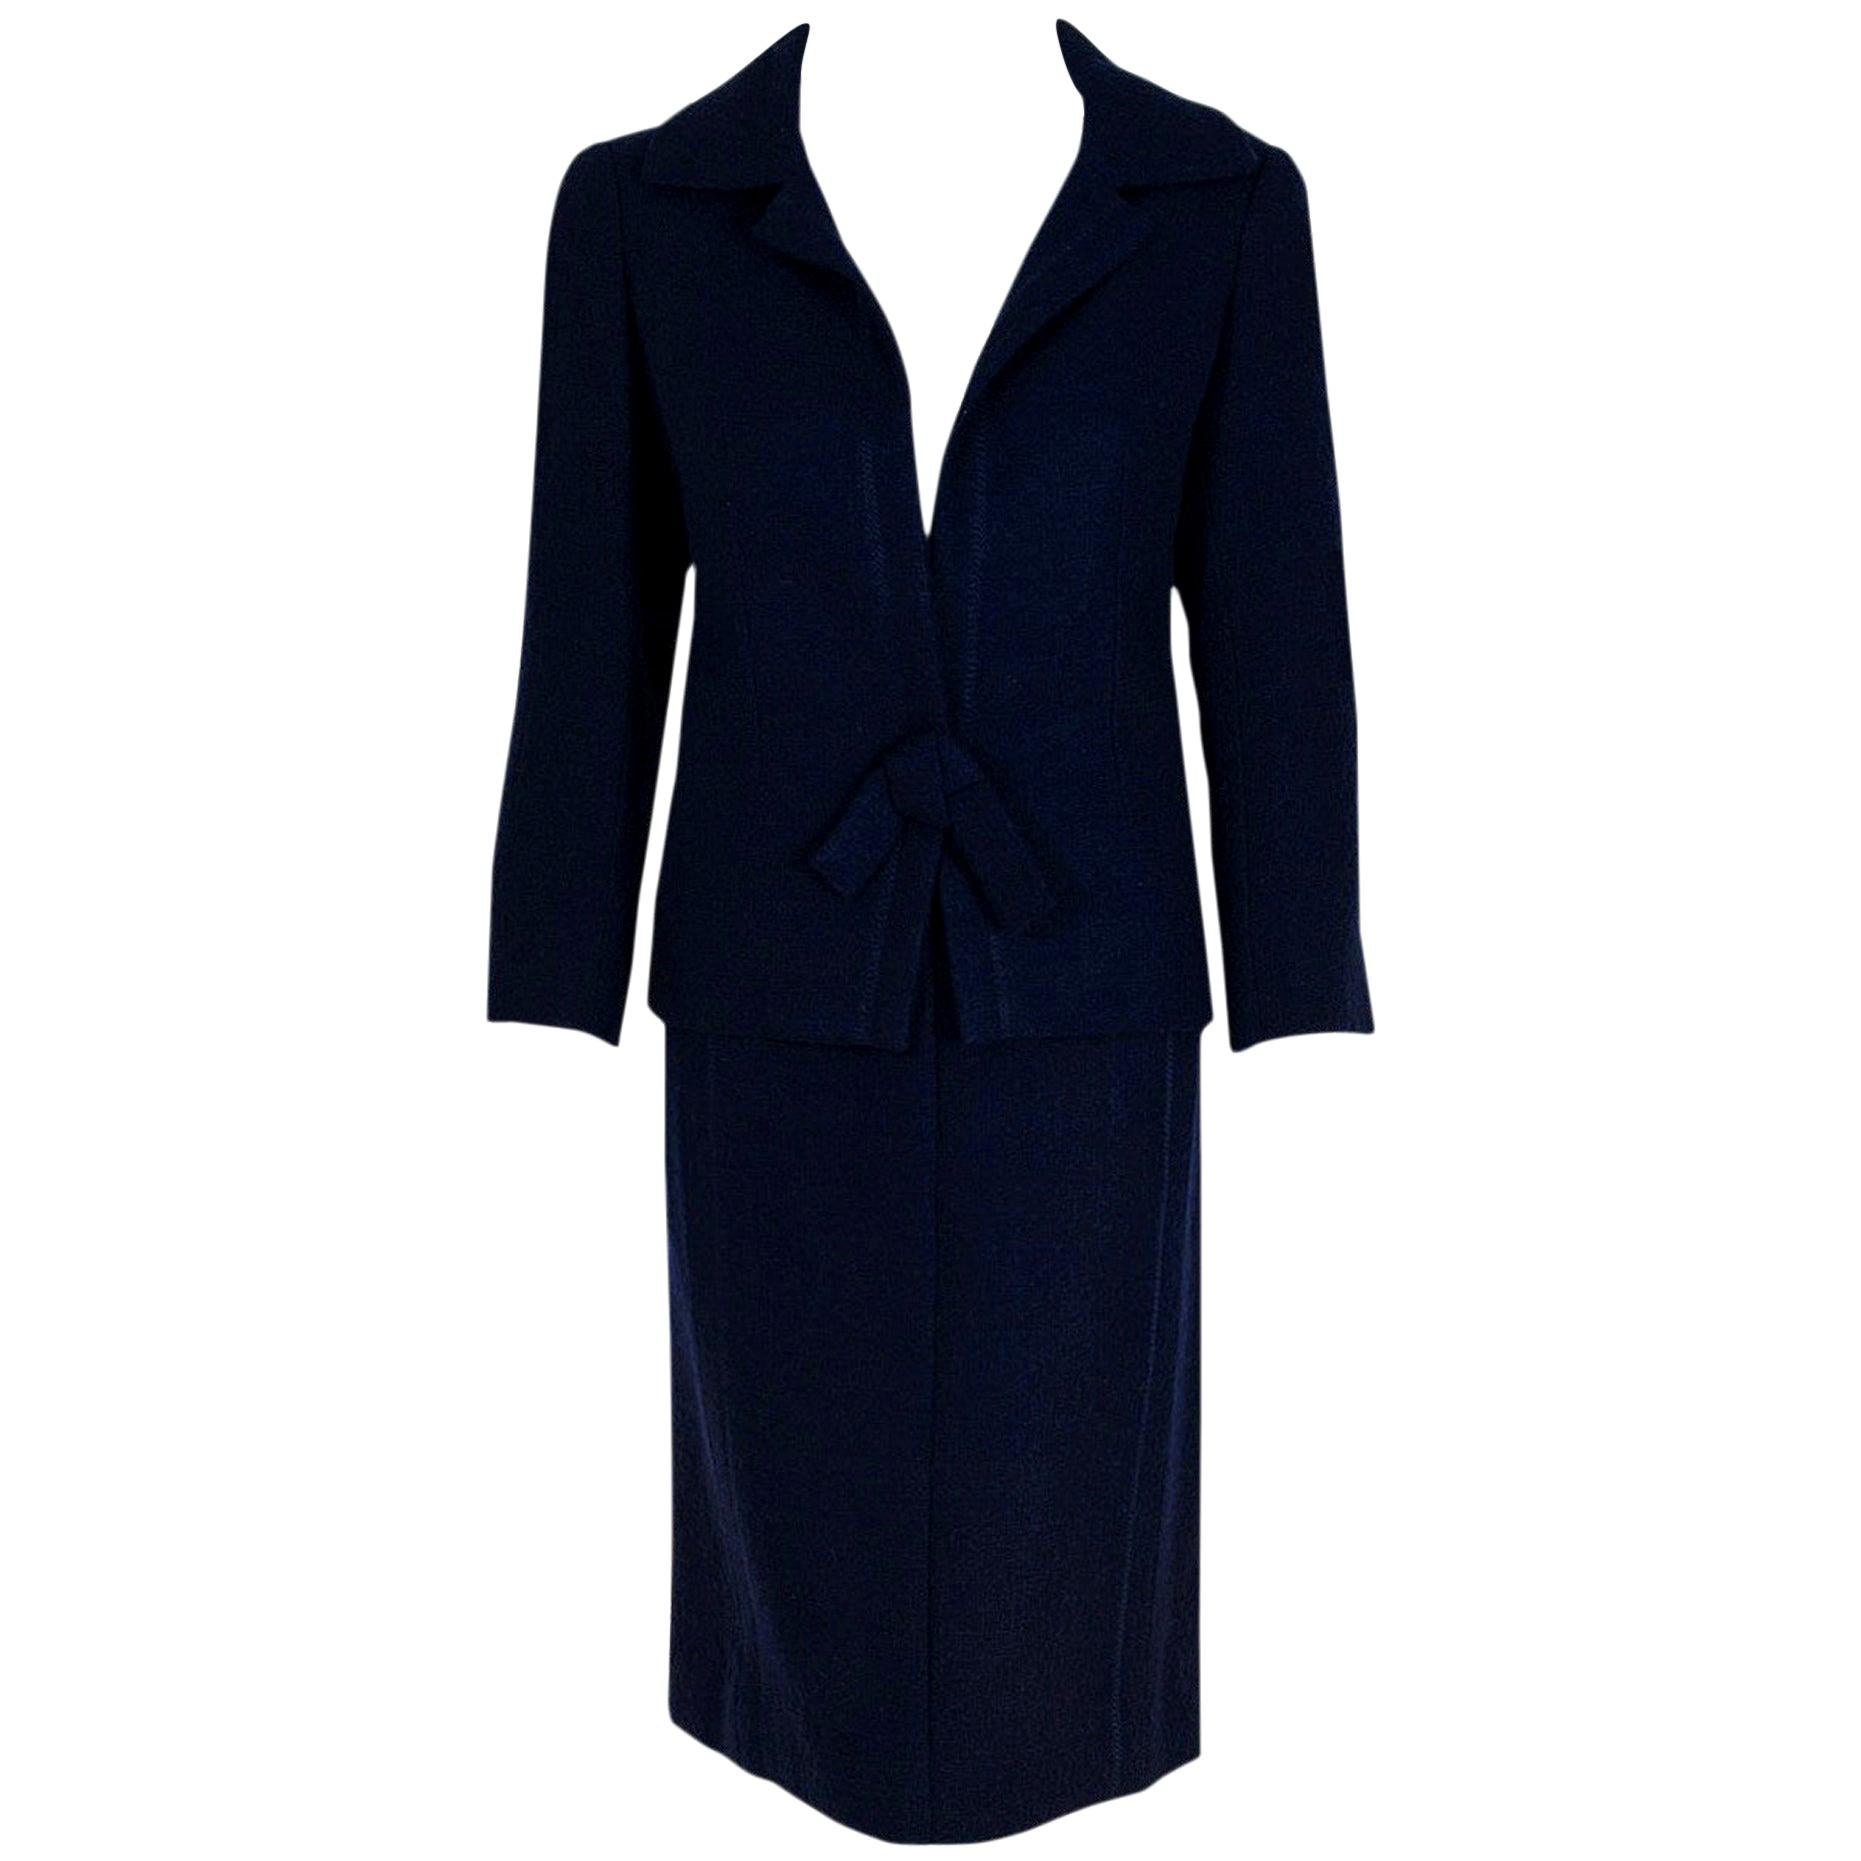 1962 Christian Dior Haute Couture Navy Blue Wool Bow-Tie Tailored Dress Suit